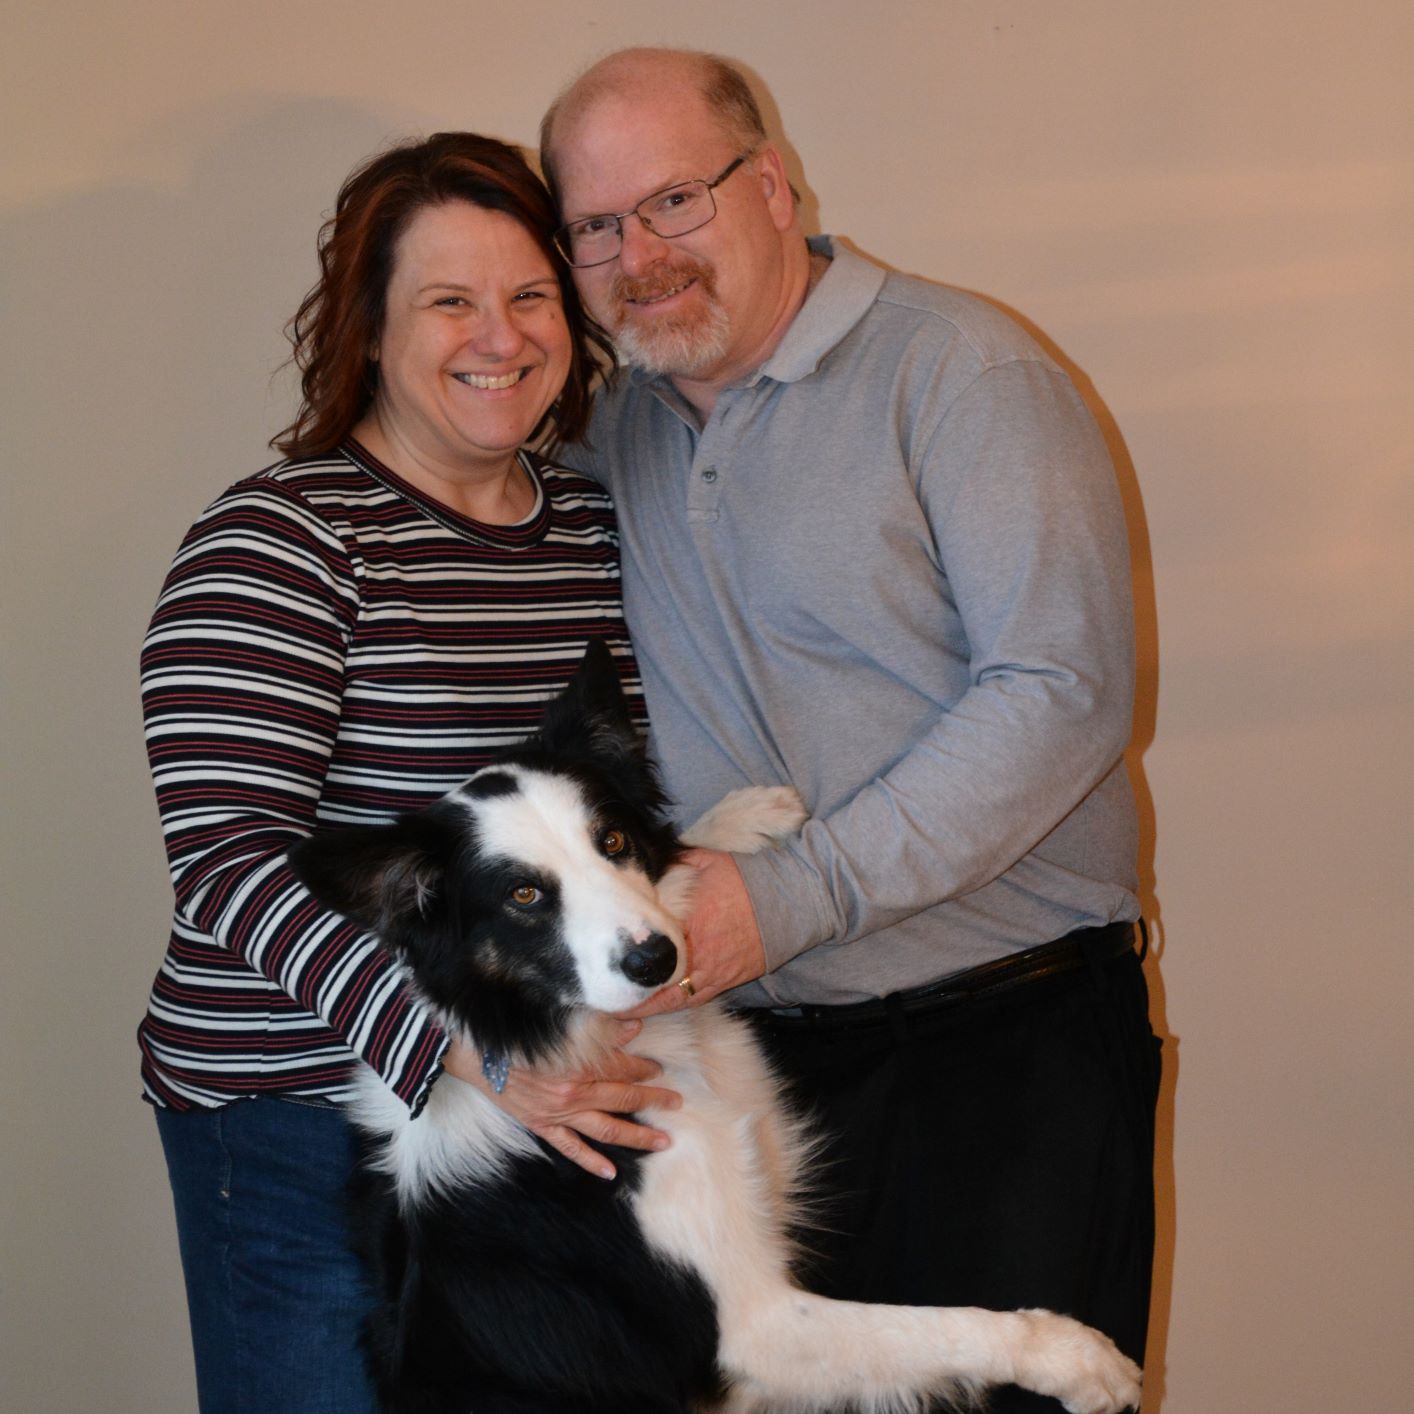 A photo of Donna Lake, her dog and her husband.